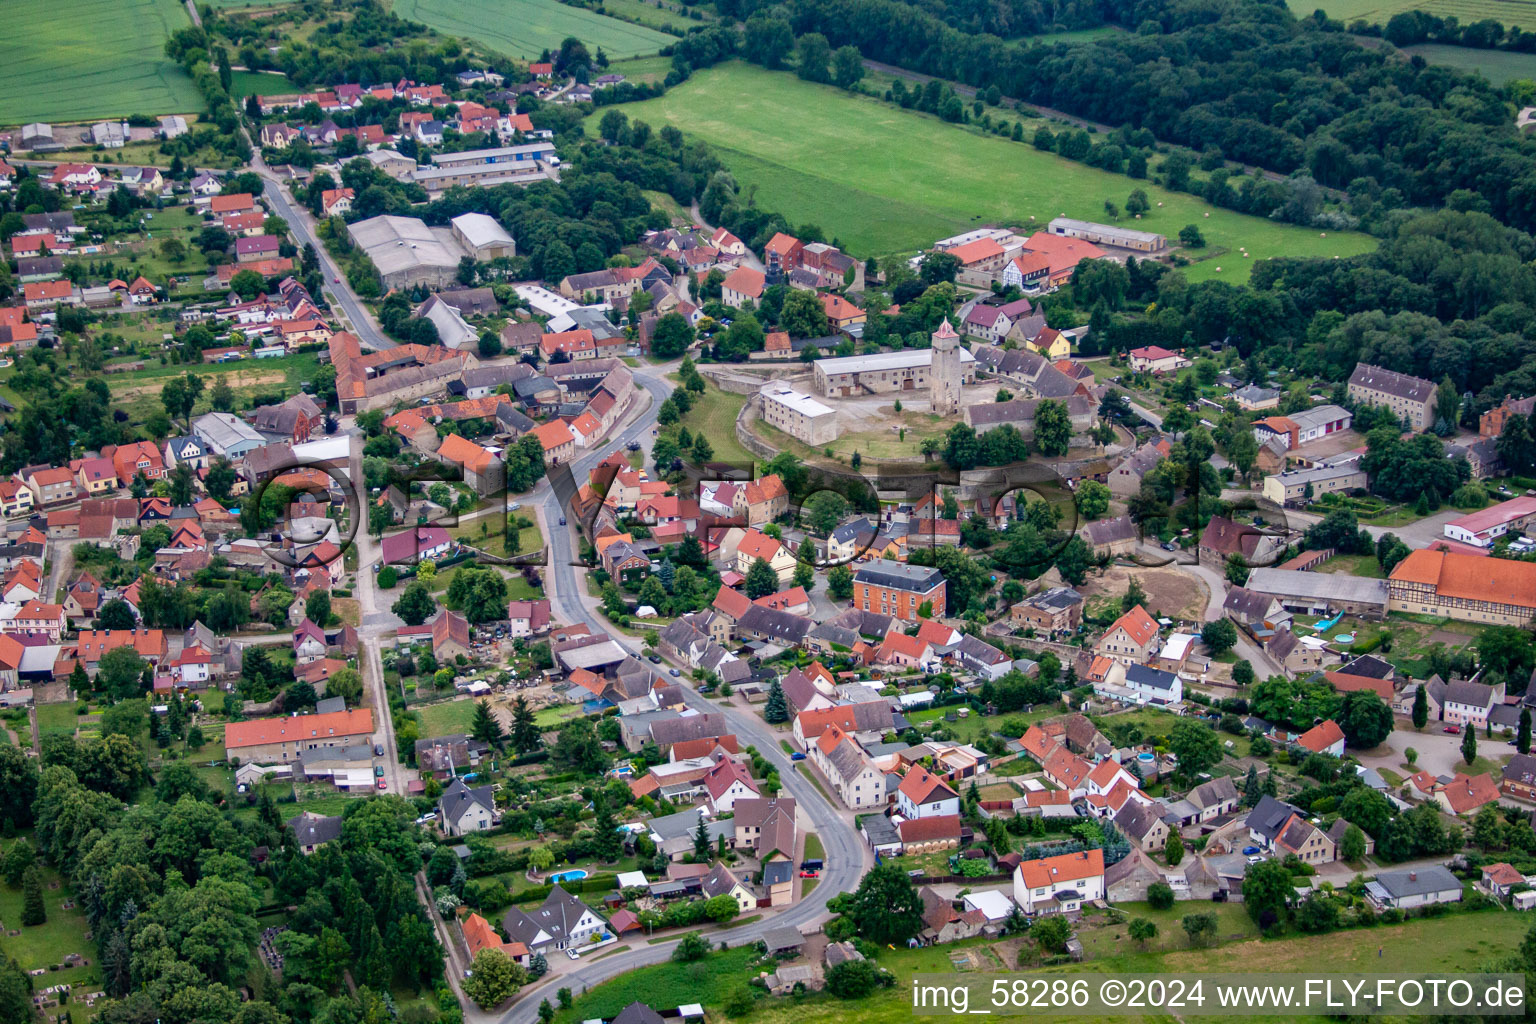 Village - view on the edge of agricultural fields and farmland in Hausneindorf in the state Saxony-Anhalt, Germany